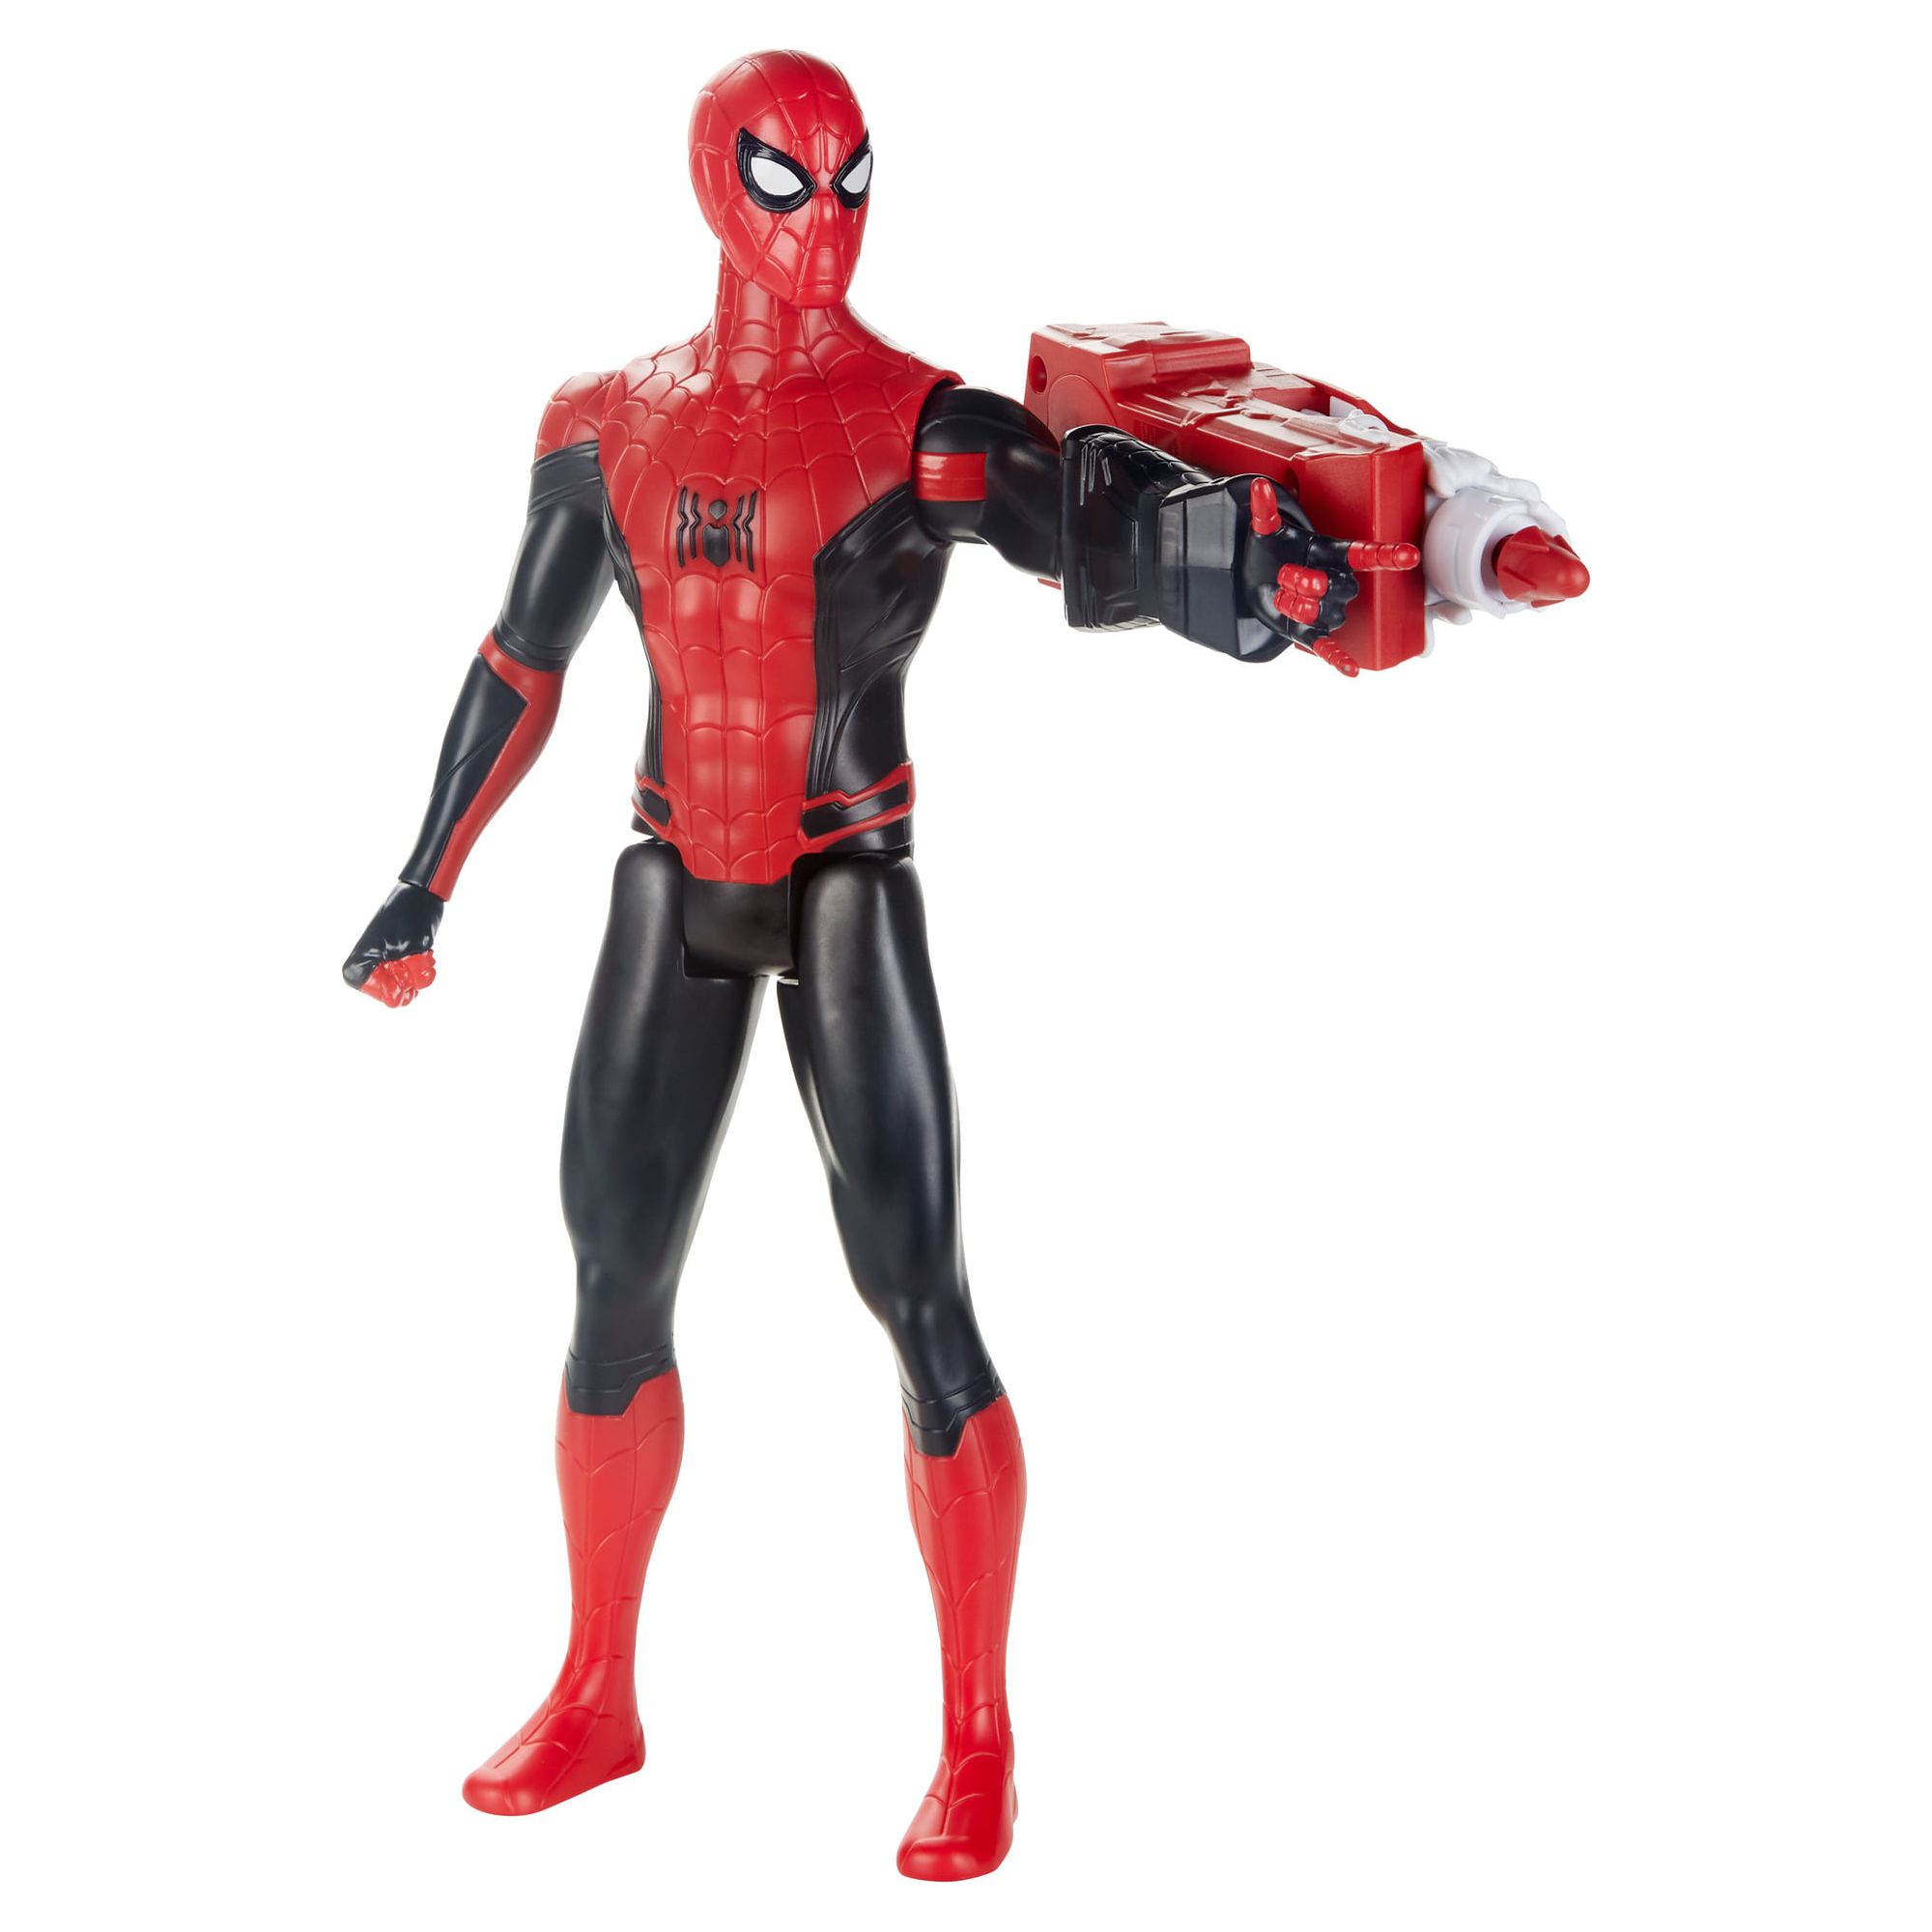 Spider-Man Far from Home Titan Hero Series Figure - image 4 of 7